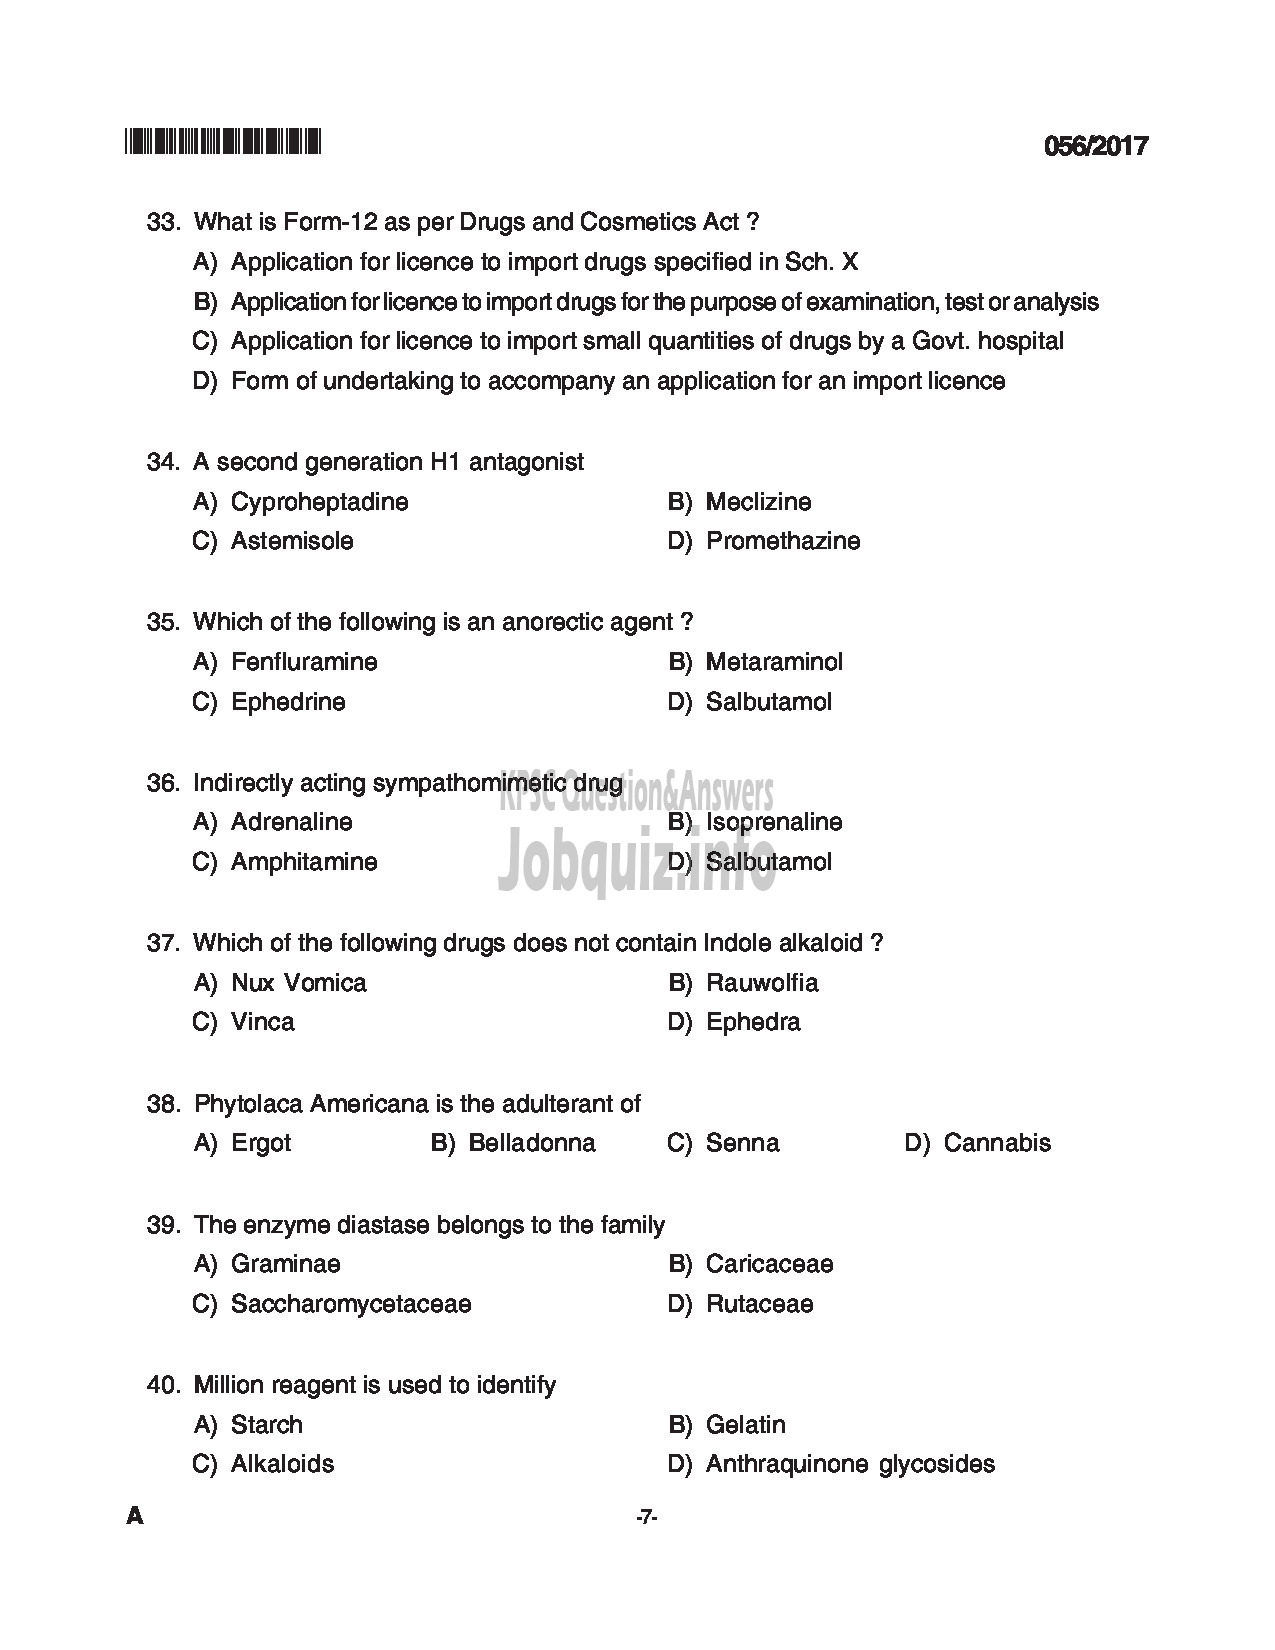 Kerala PSC Question Paper - PHARMACIST GRADE II INSURANCE MEDICAL SERVICES QUESTION PAPER-7